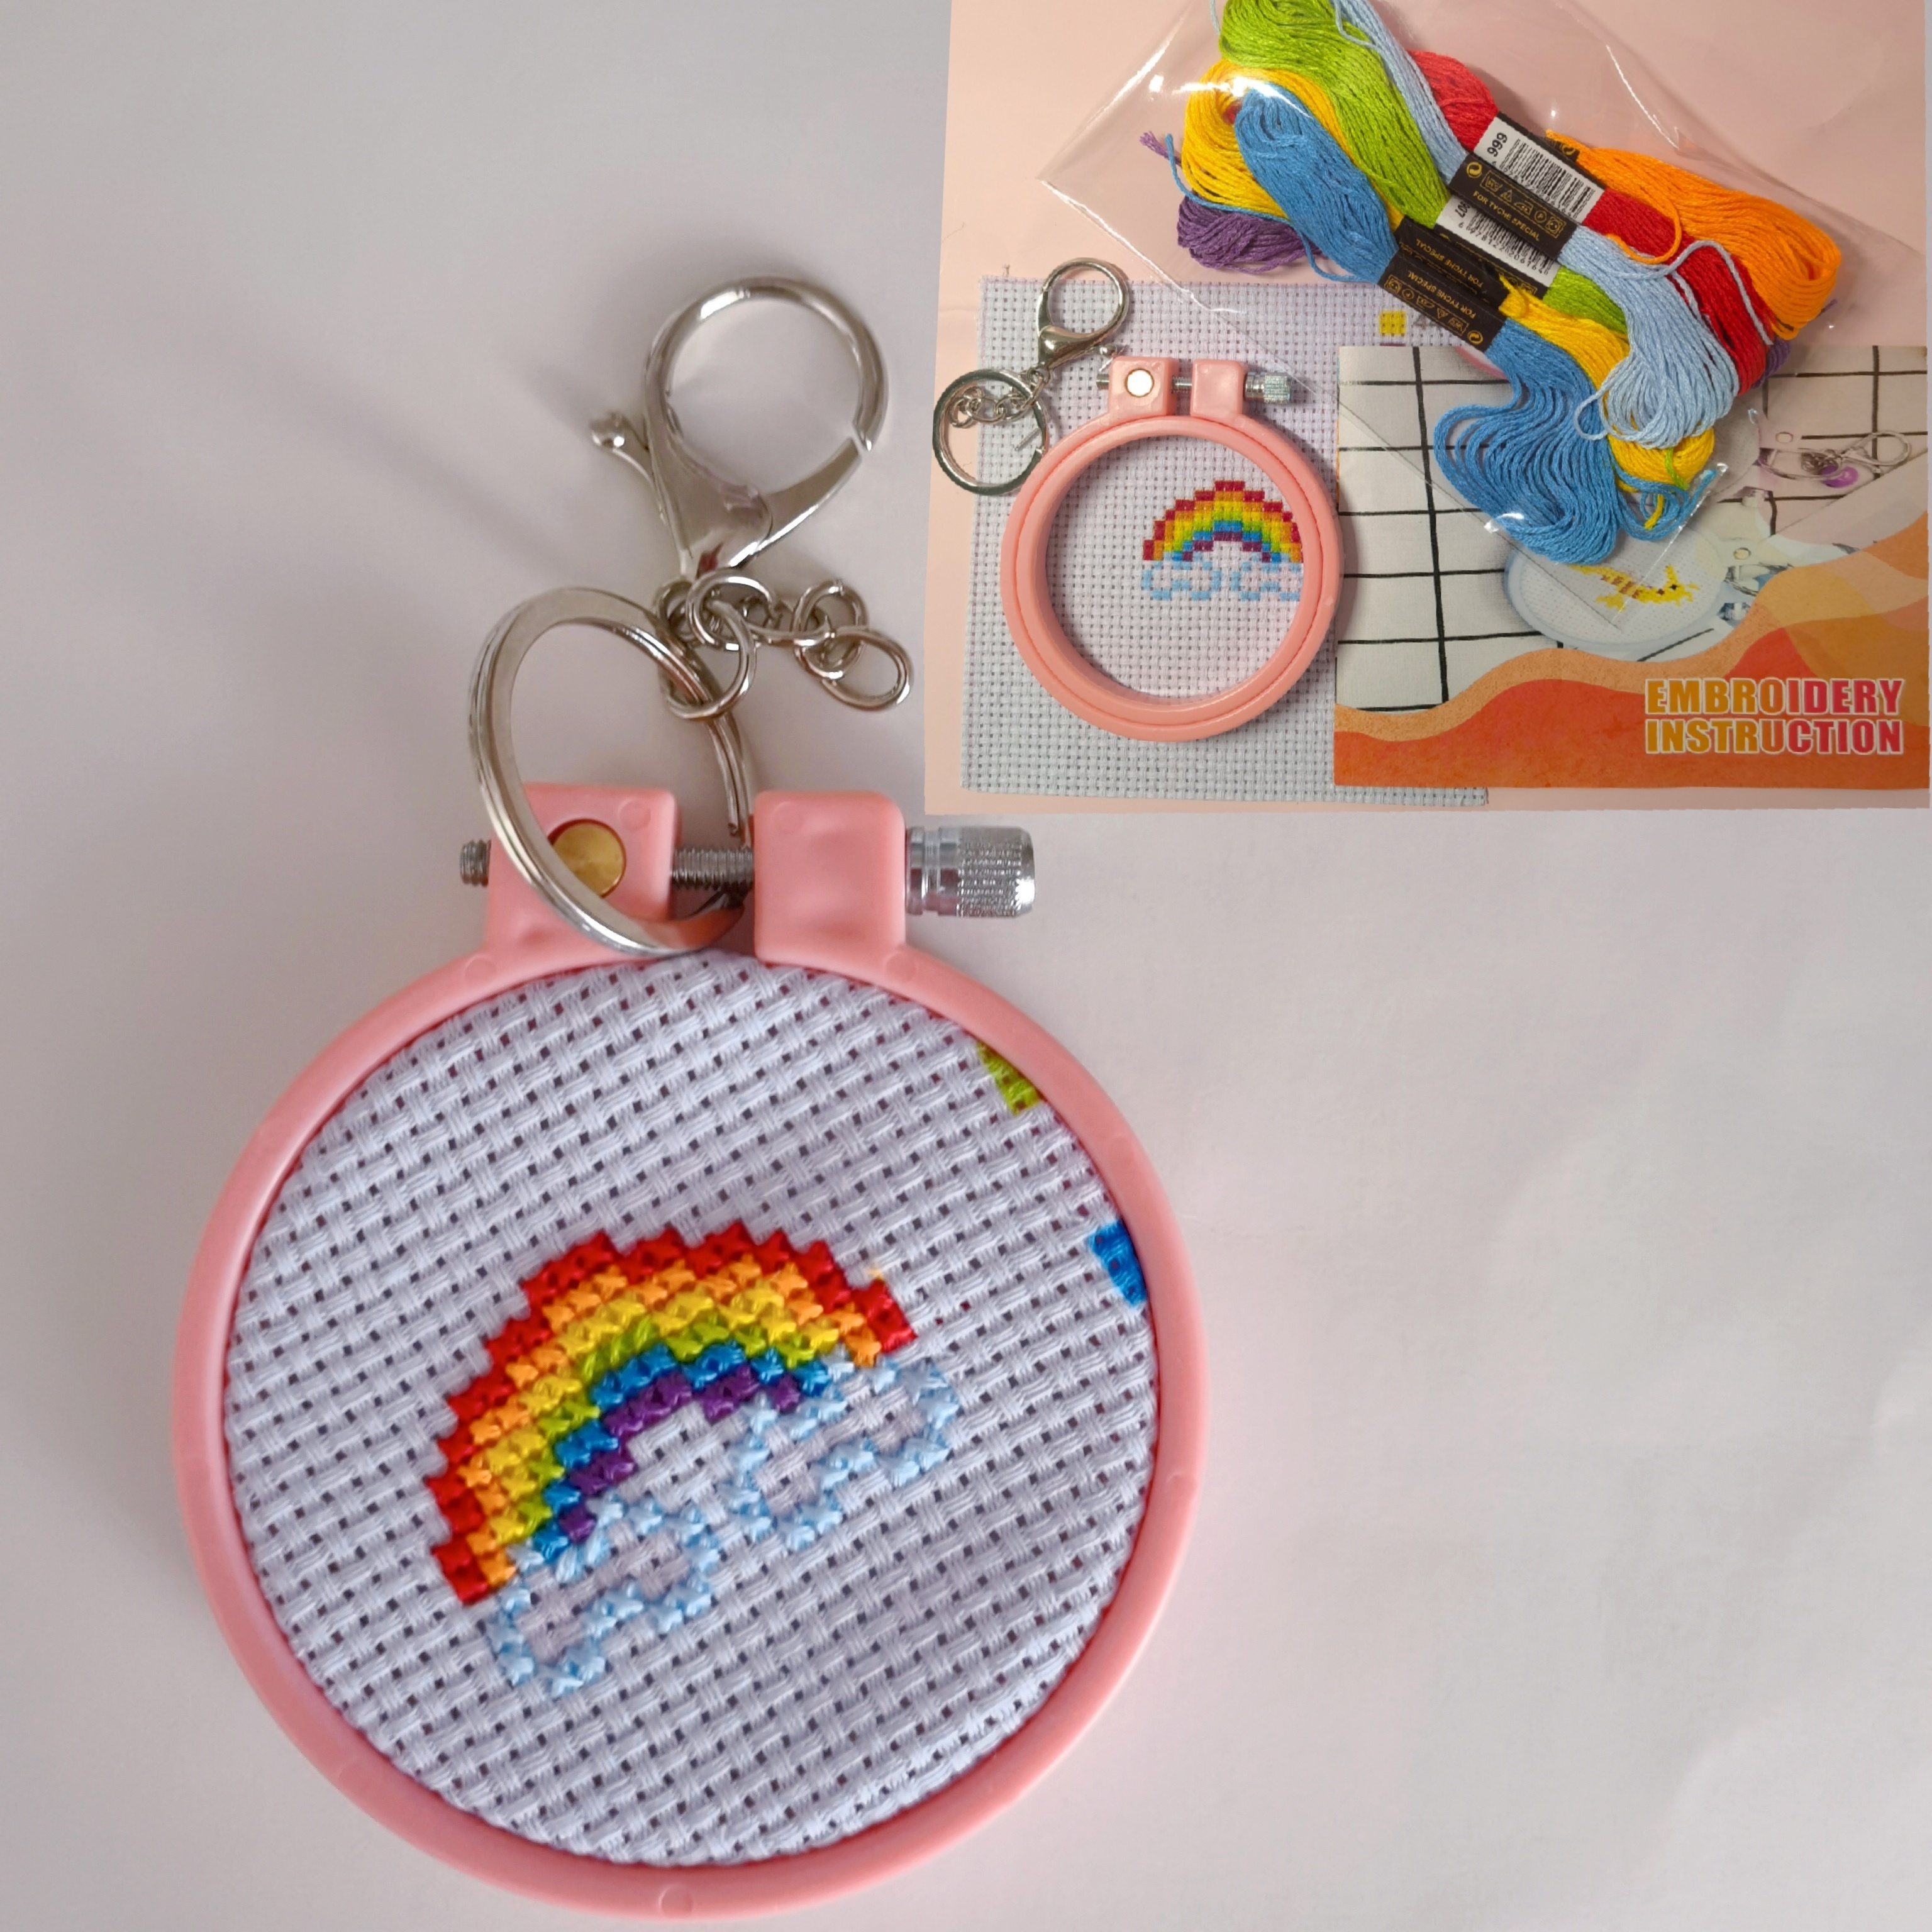 1 Set, Cross Stitch Beginner Kit 1pc Includes 1 Cross Stitch Cloth Stamped  With Pattern+1 Colorful Hoop+1 Key Ring+1 Needle+1 English Instruction+